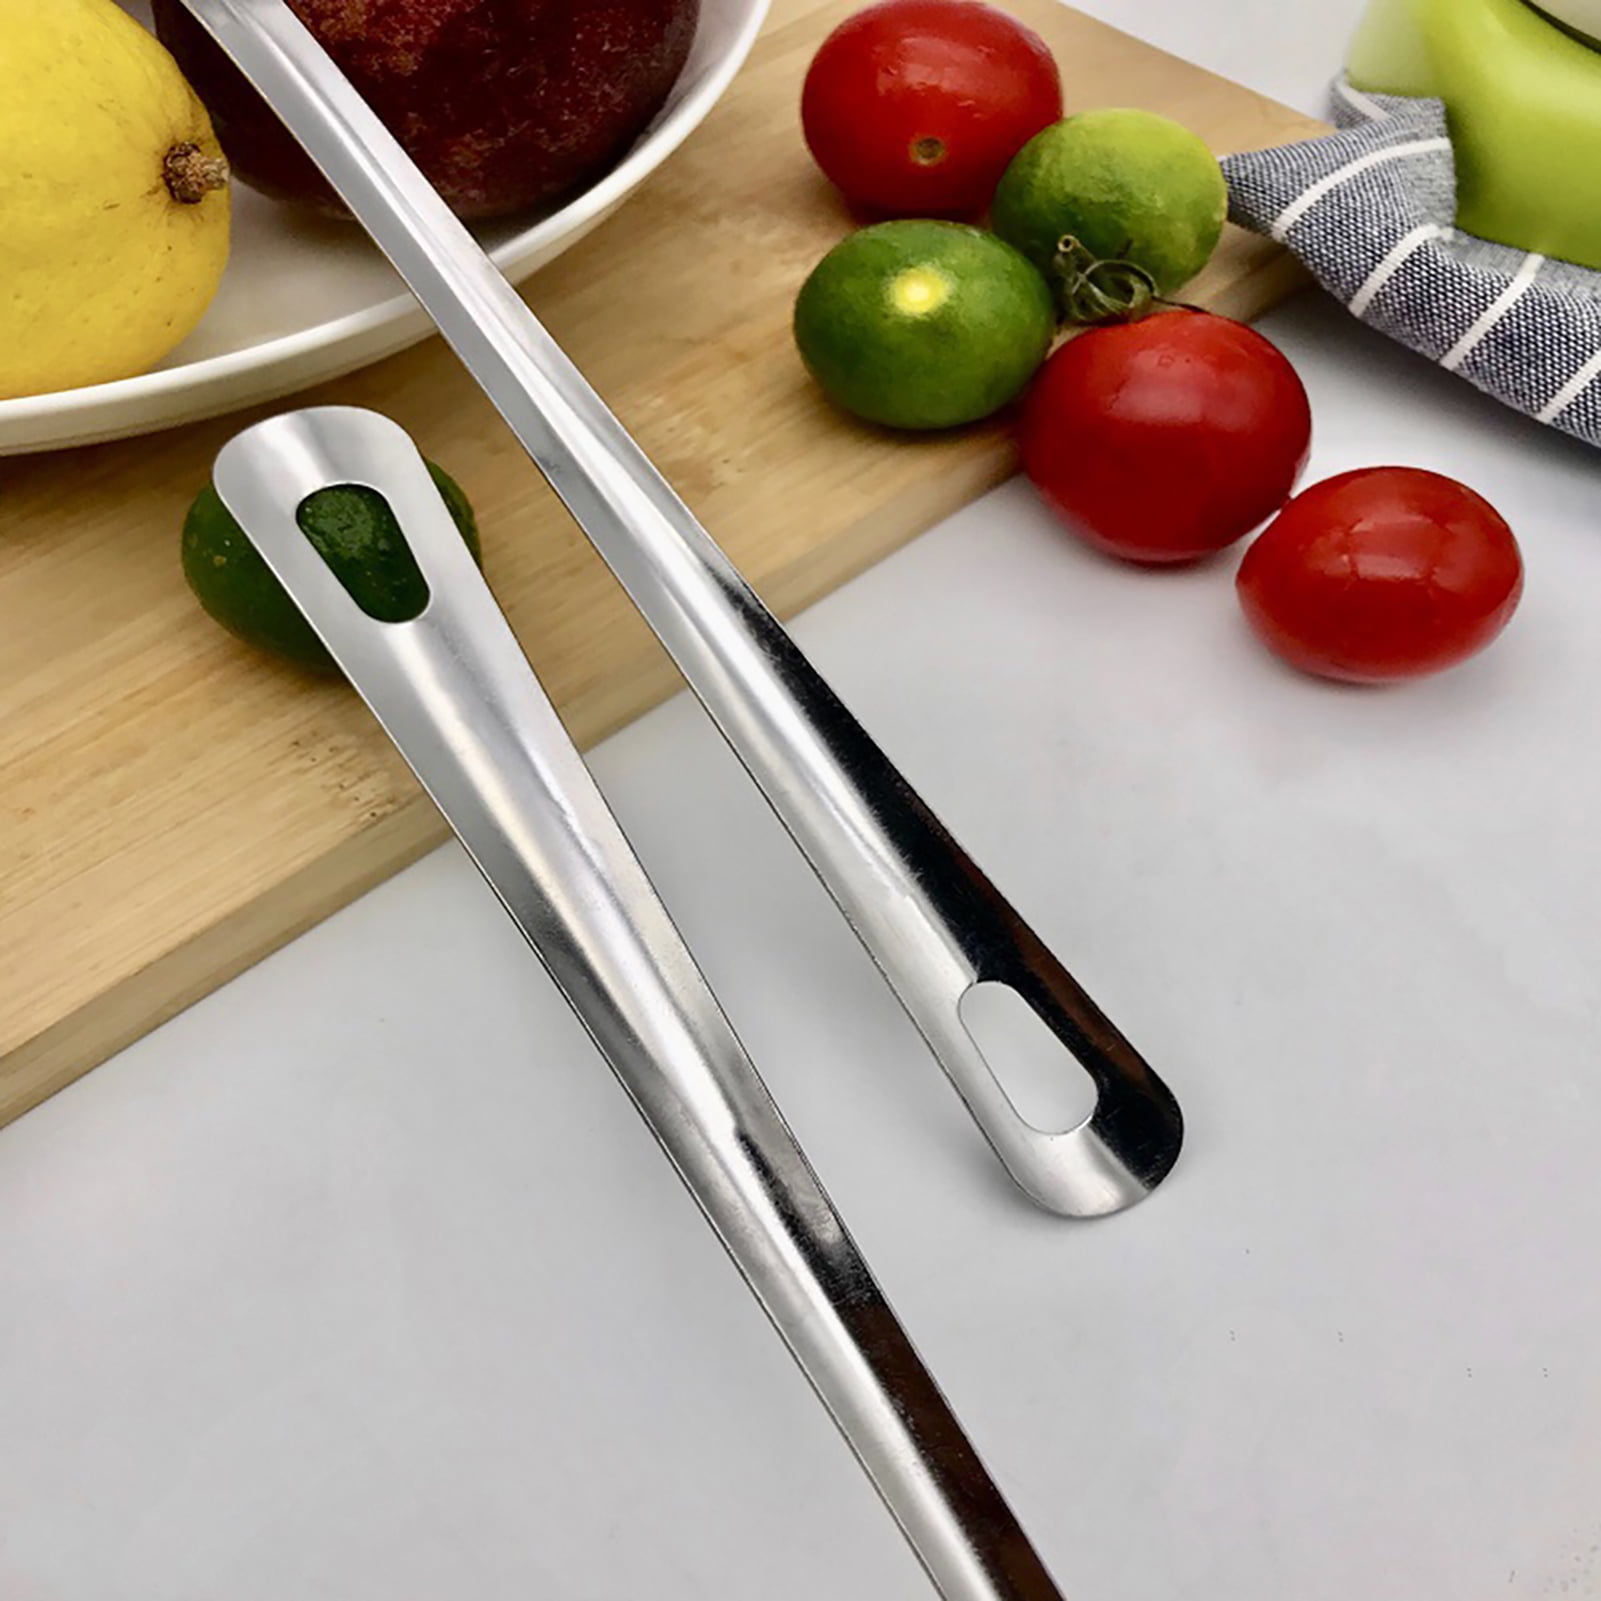 Collfa Soup Ladle Metal SUS304 Stainless Steel Ladles Spoon And Slotted  Colander Spoon Set Small Soup Ladle With Holes Strainer Scoop Ladles For